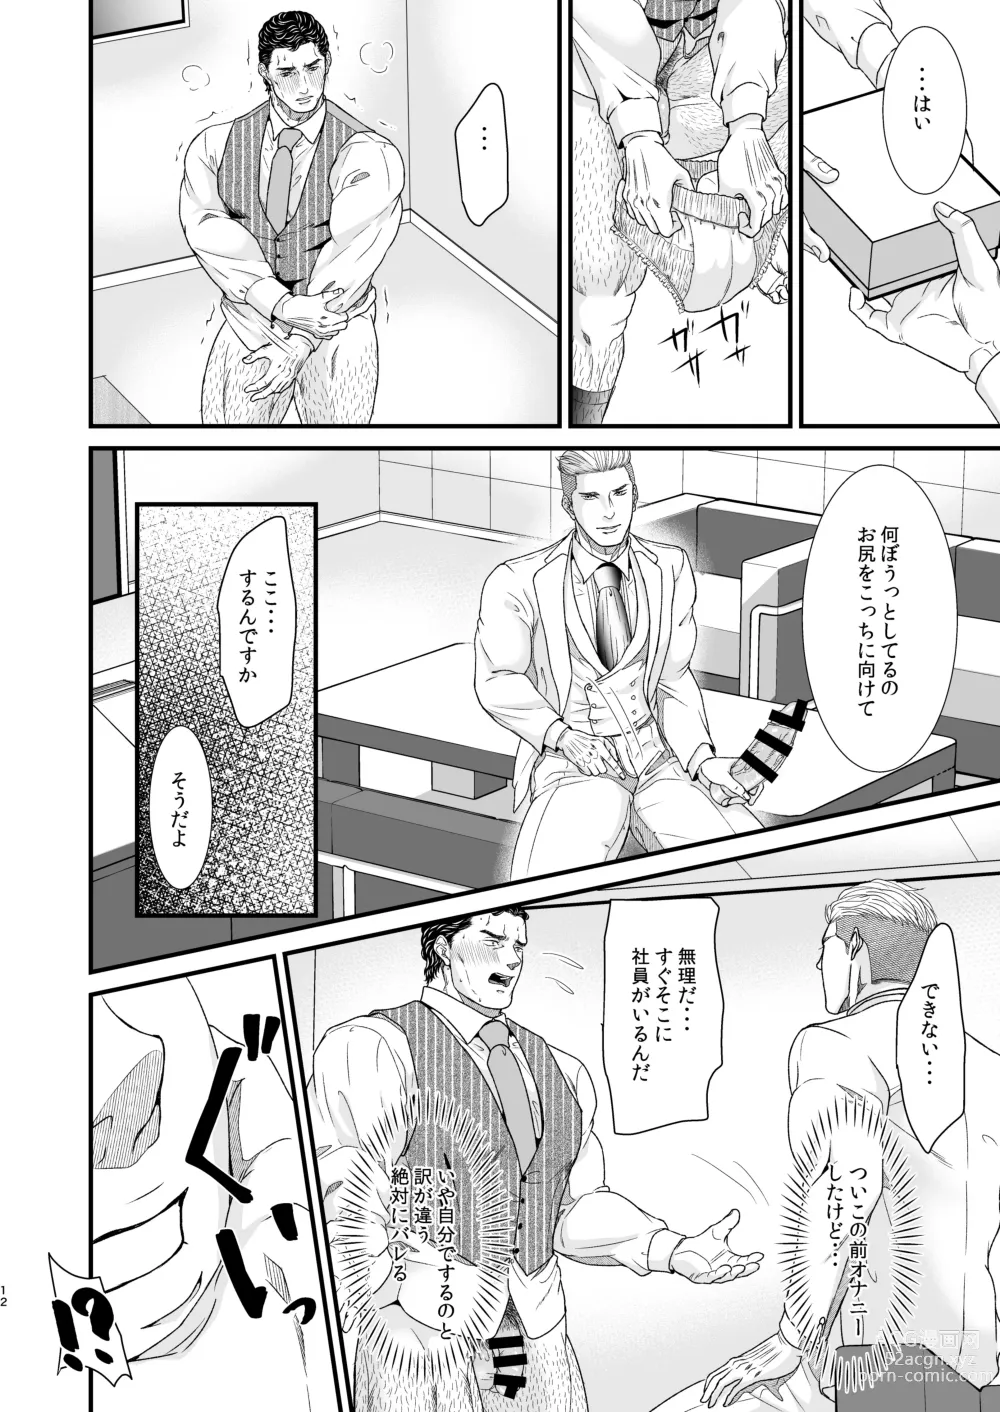 Page 11 of doujinshi Confusion 2